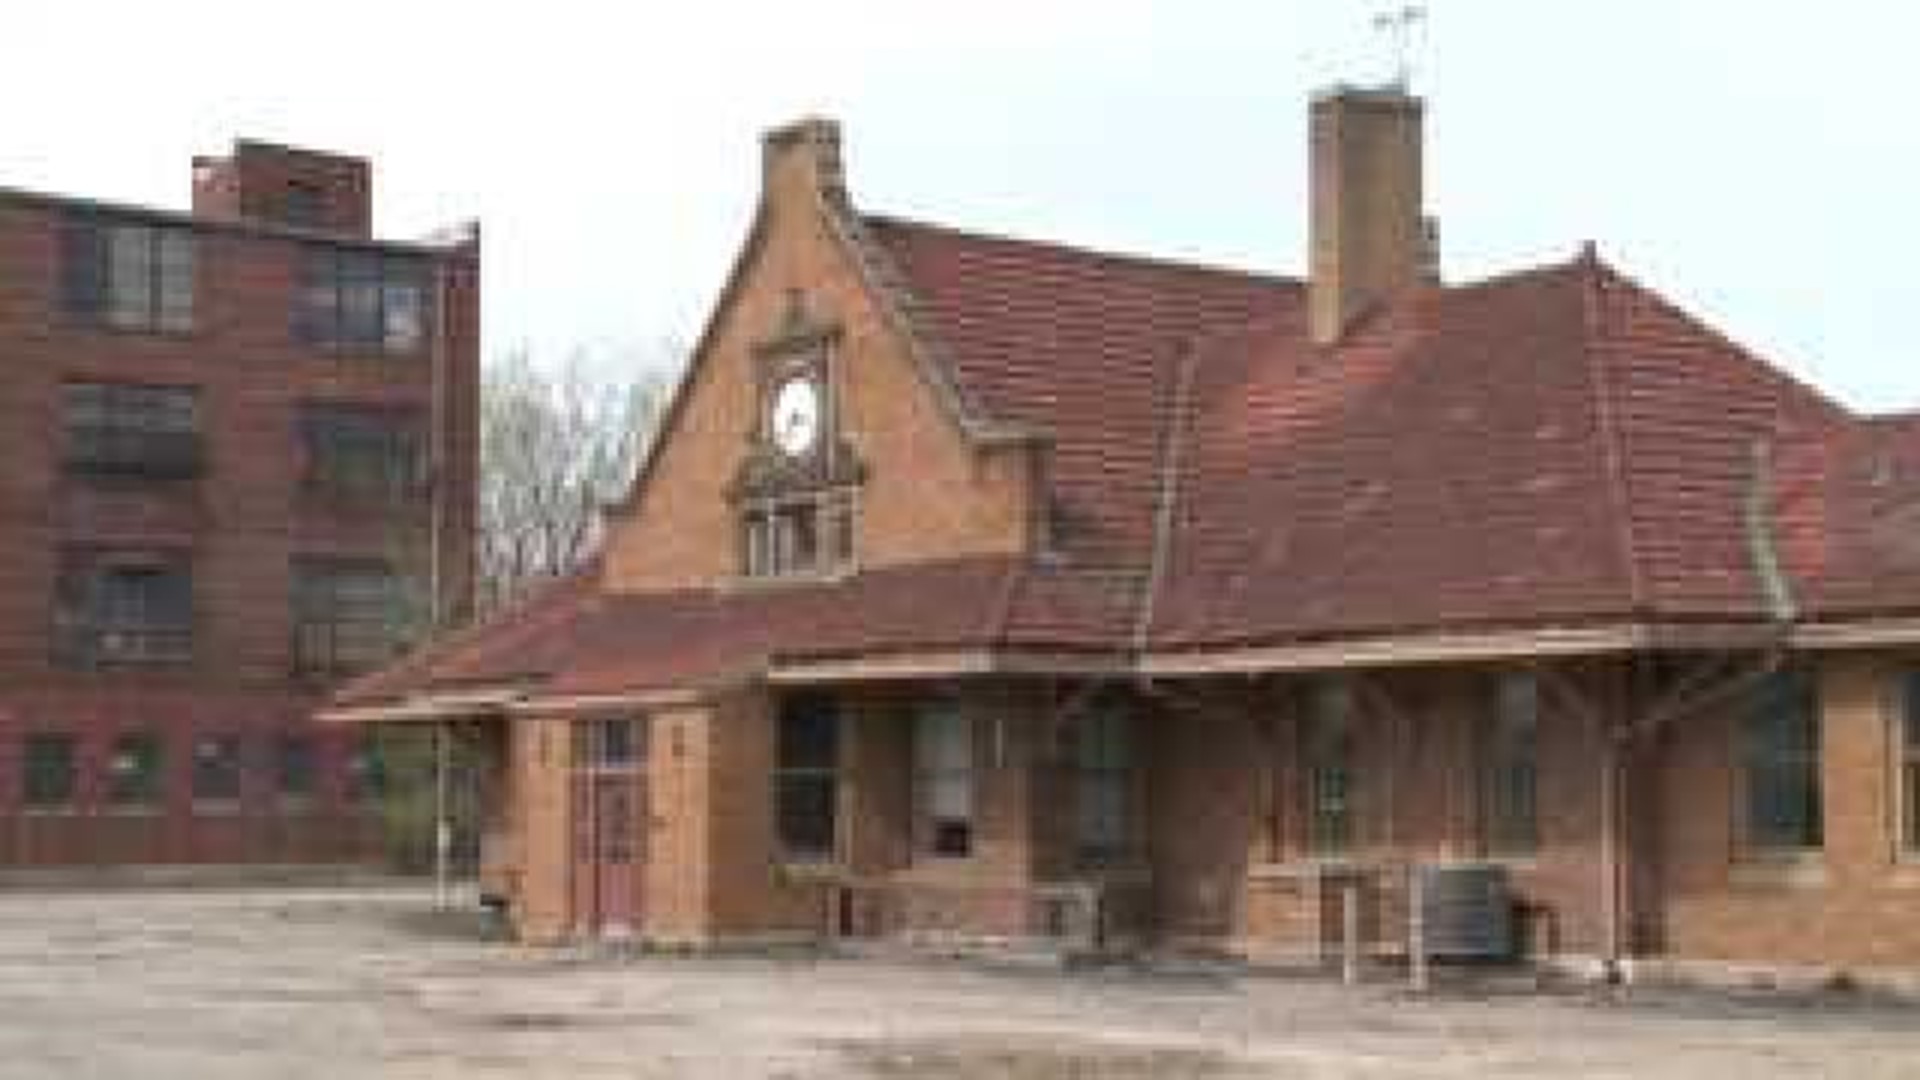 Plans to move old Moline train depot could derail